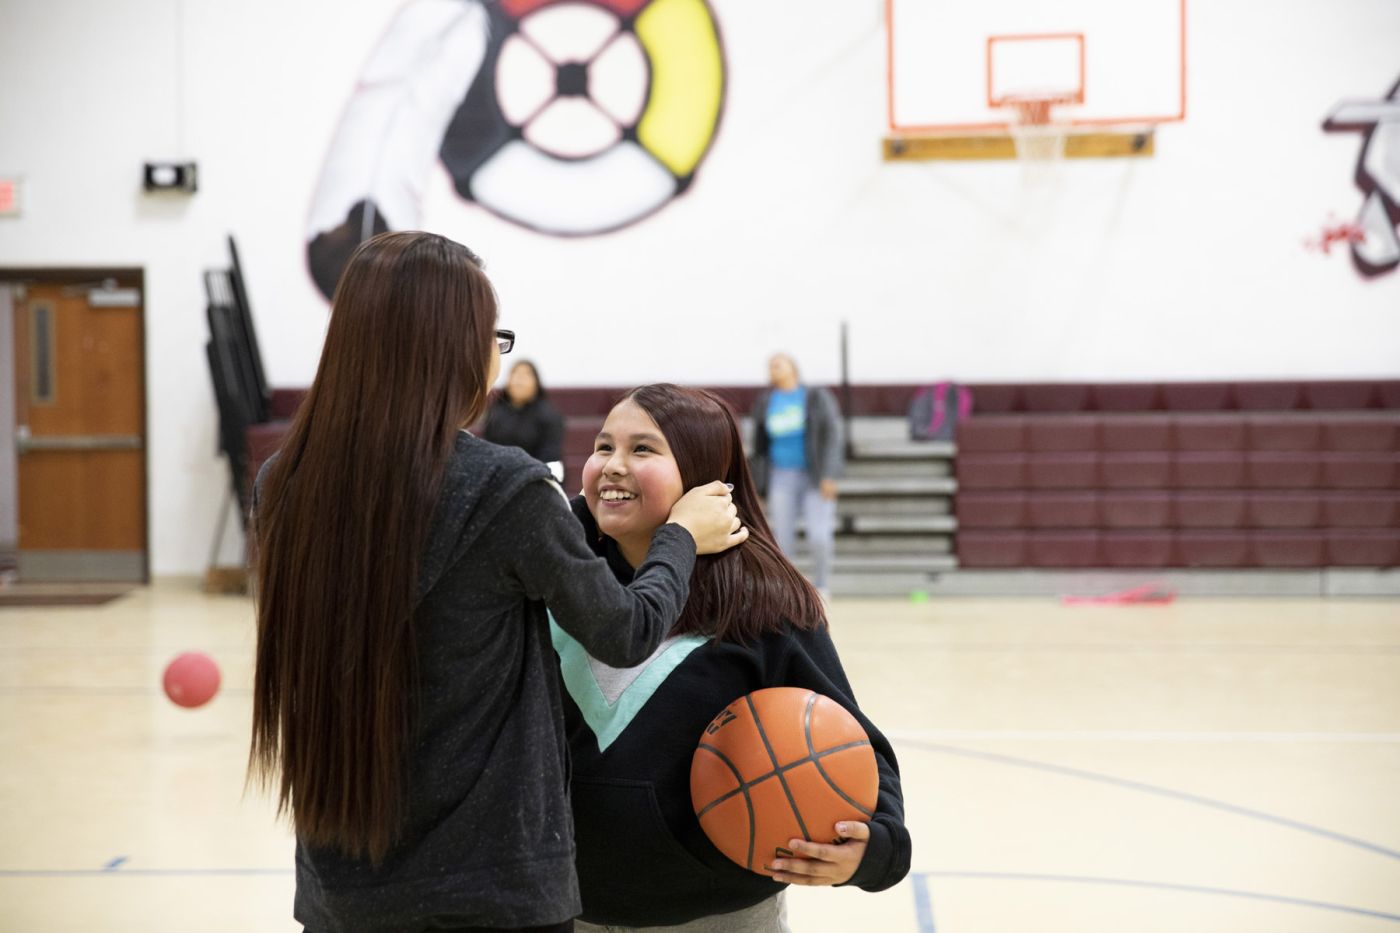 Two young women embrace on the basketball court